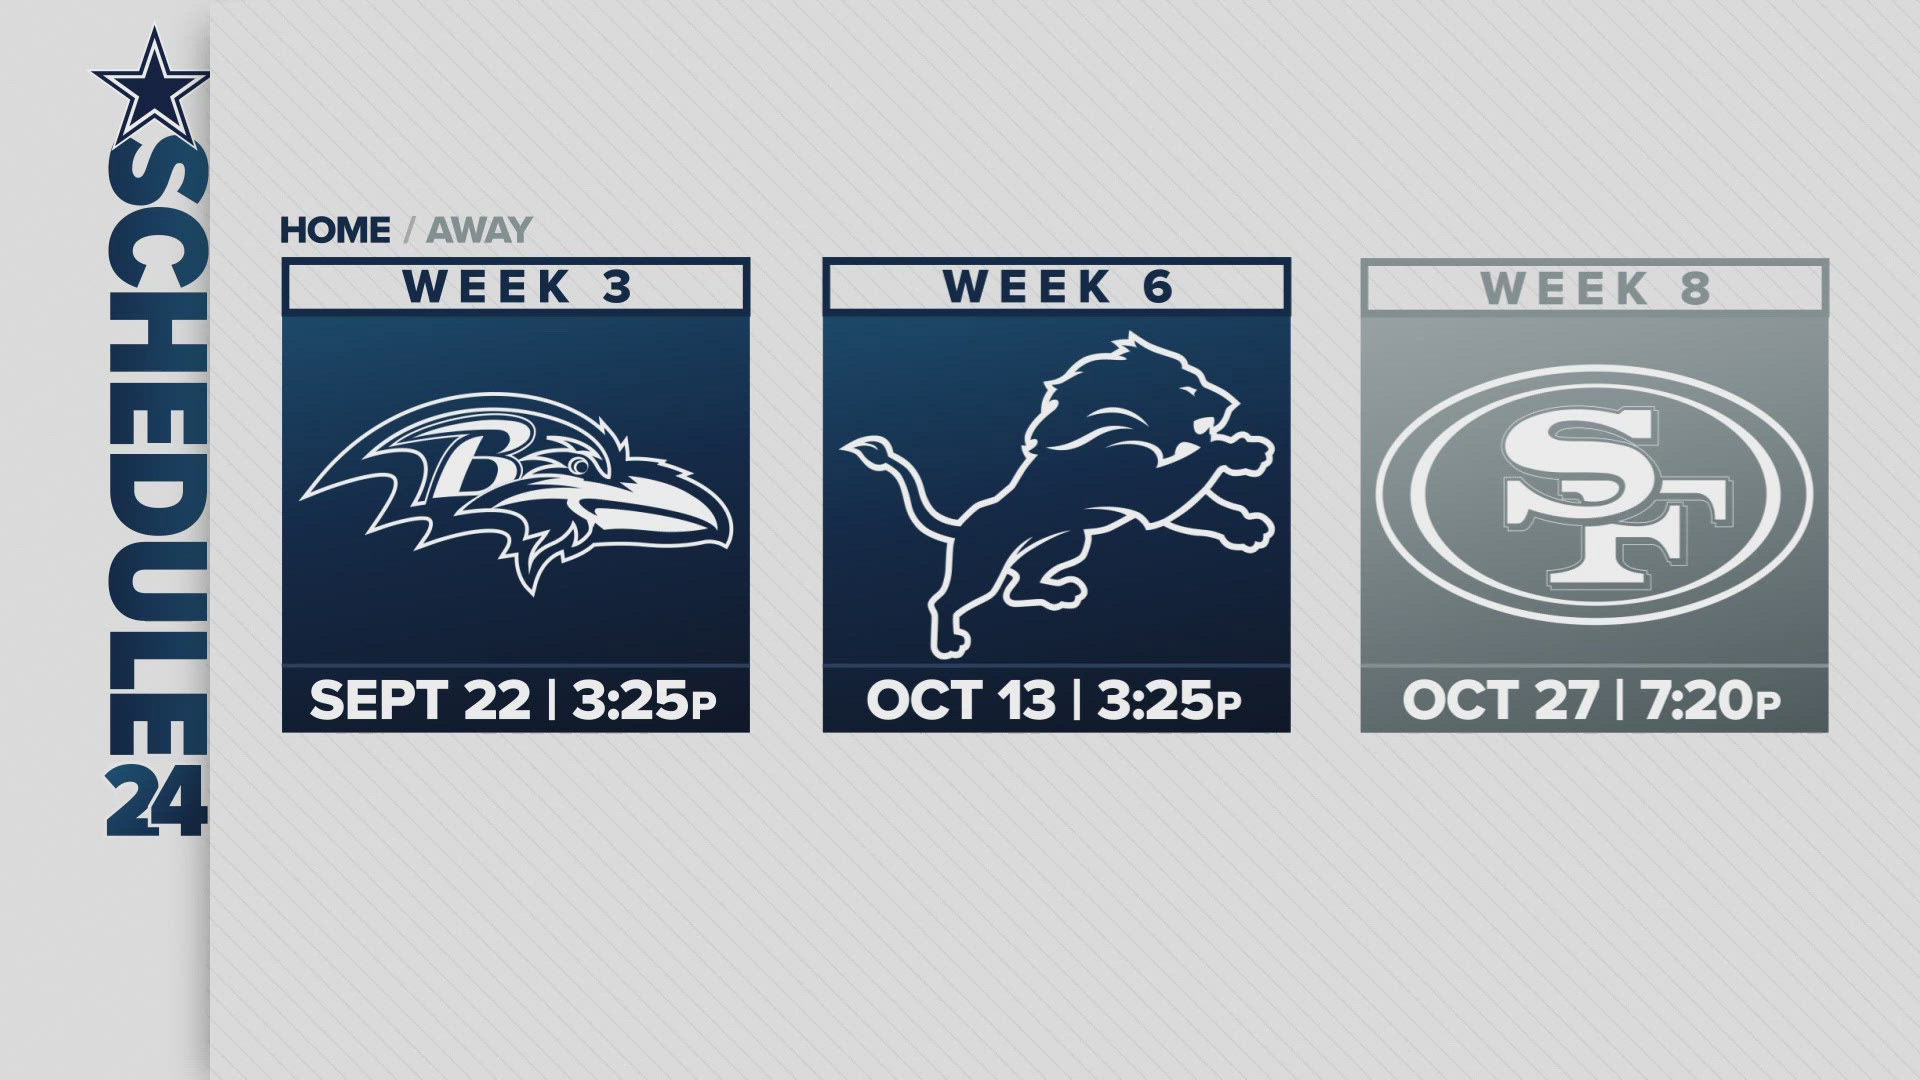 Dallas will open the season against the Browns on FOX, which will be Tom Brady's first game as a commentator.